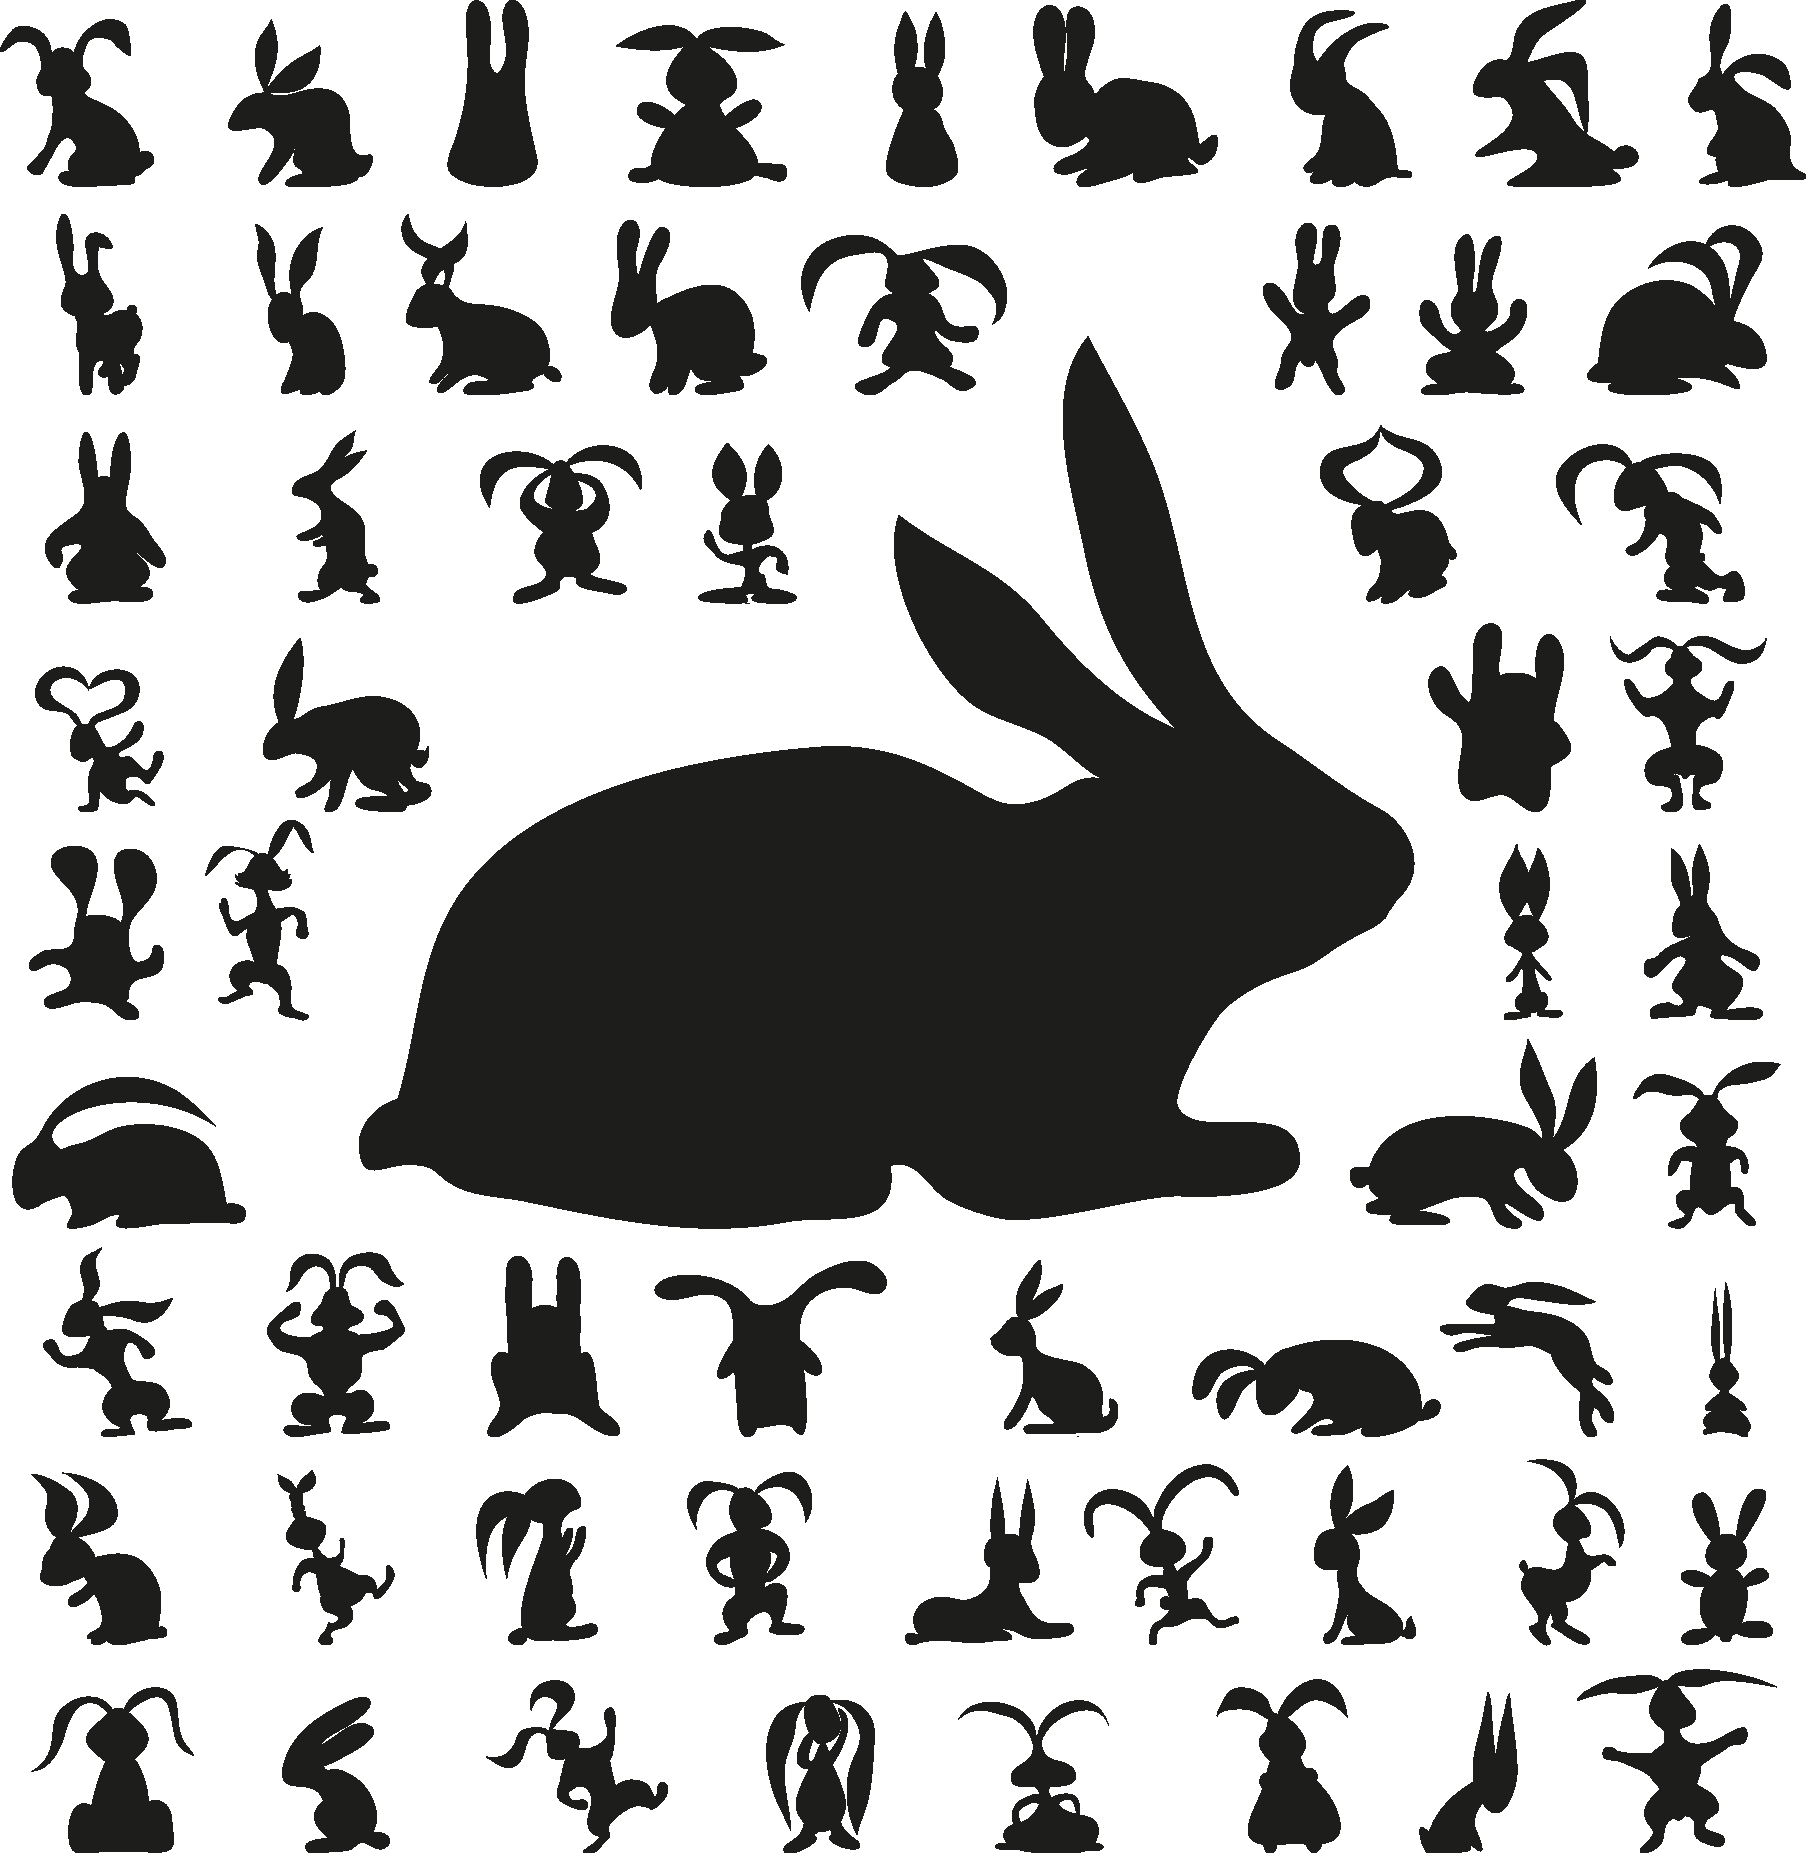 Cute bunny silhouettes Download Vector